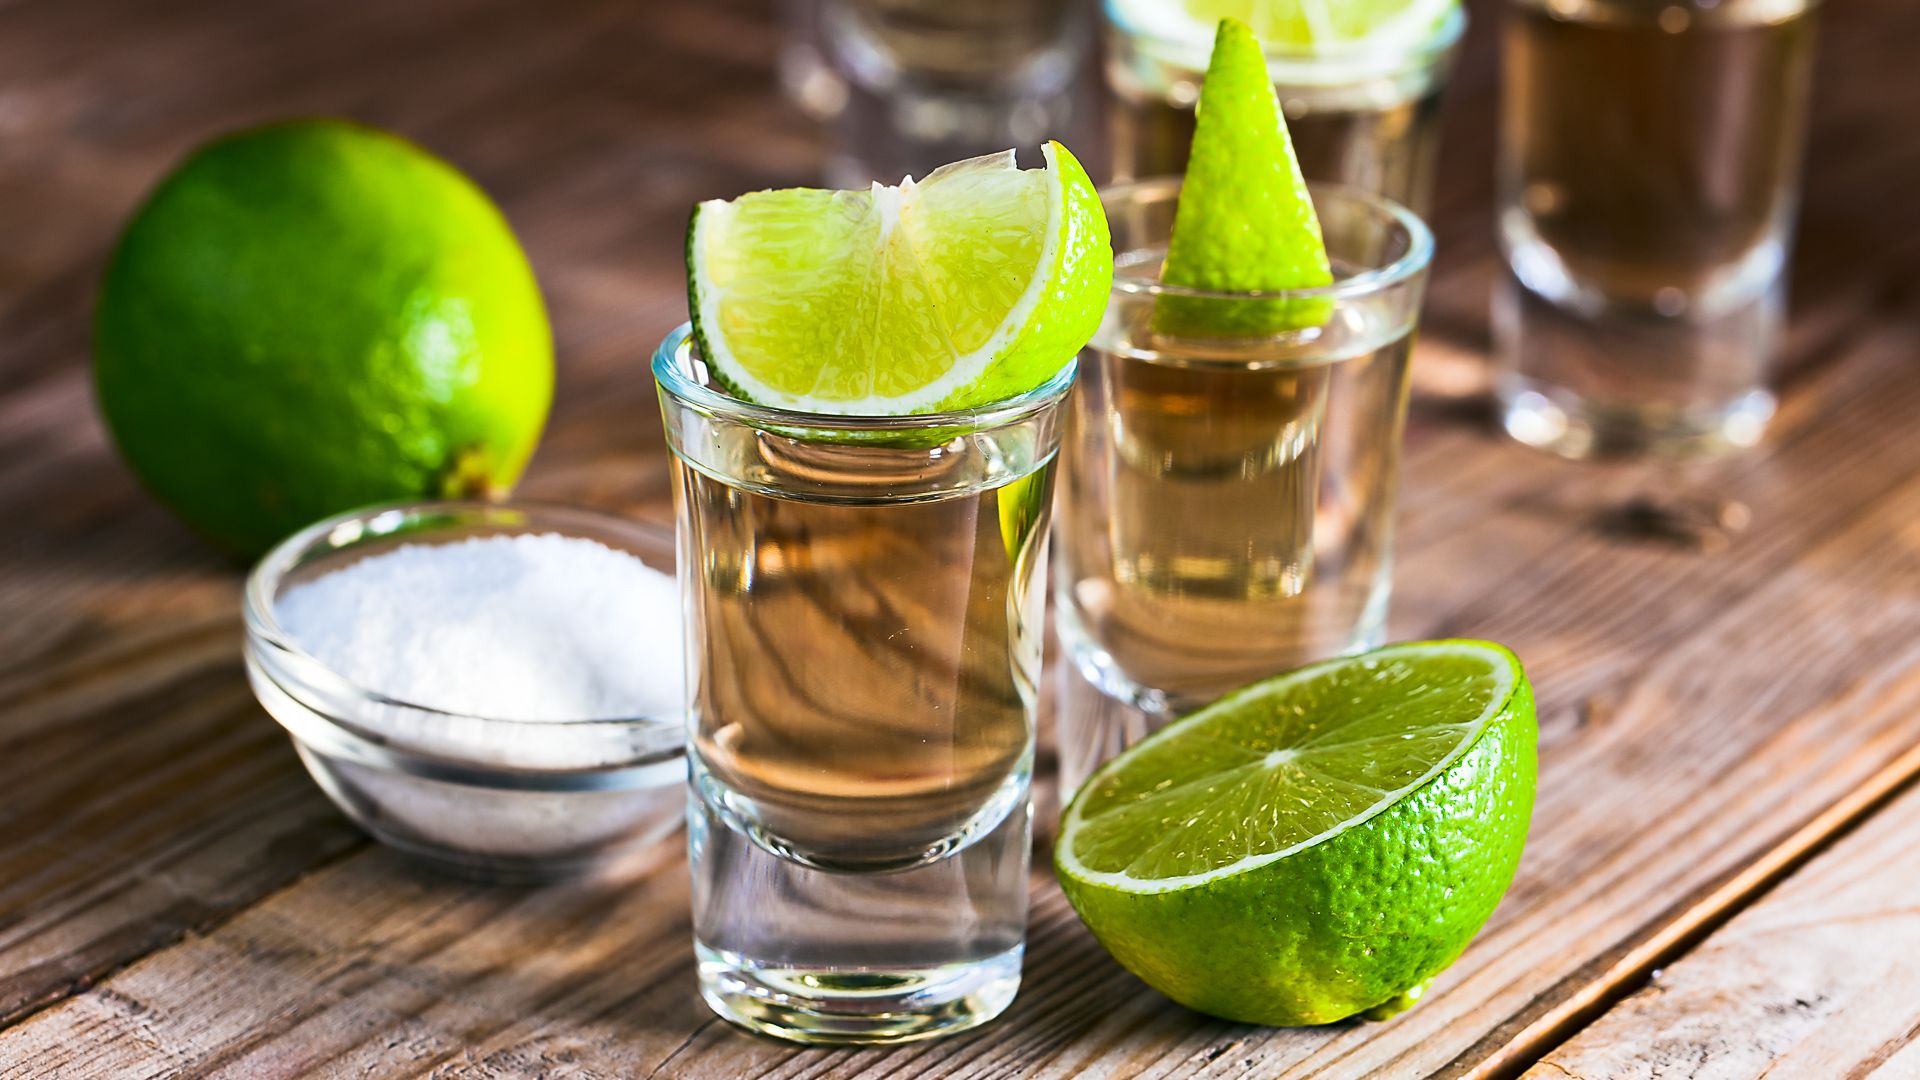 National Tequila Day: 10 Deals and Freebies To Celebrate | GOBankingRates